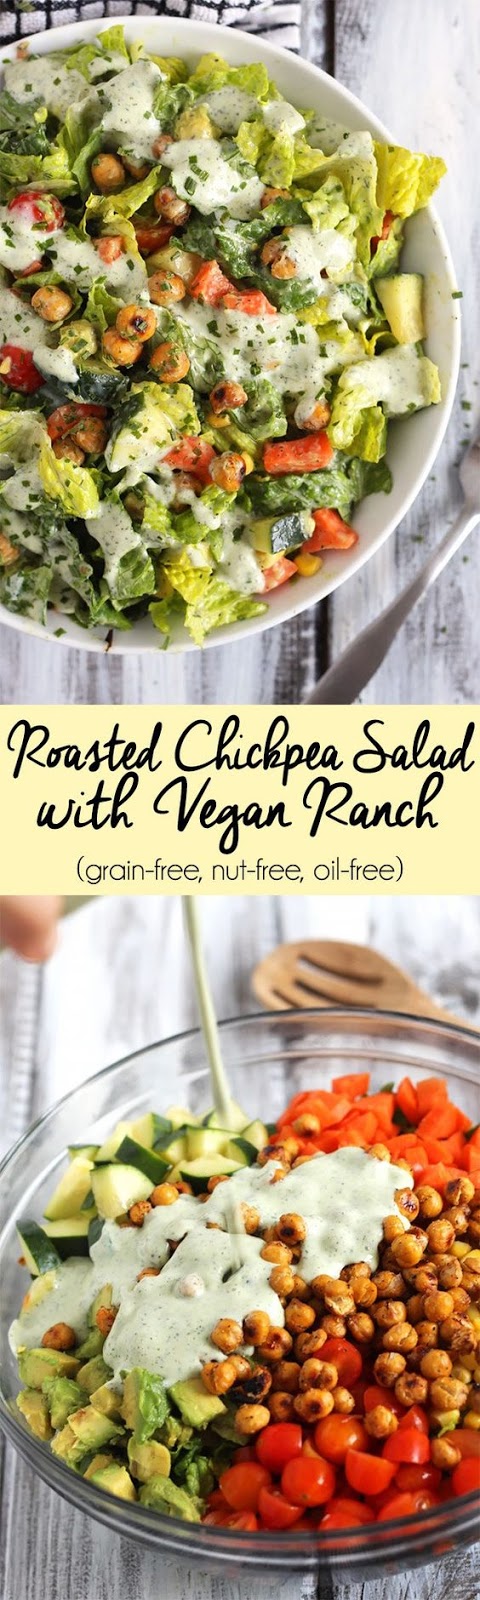 ROASTED CHICKPEA SALAD WITH VEGAN RANCH DRESSING